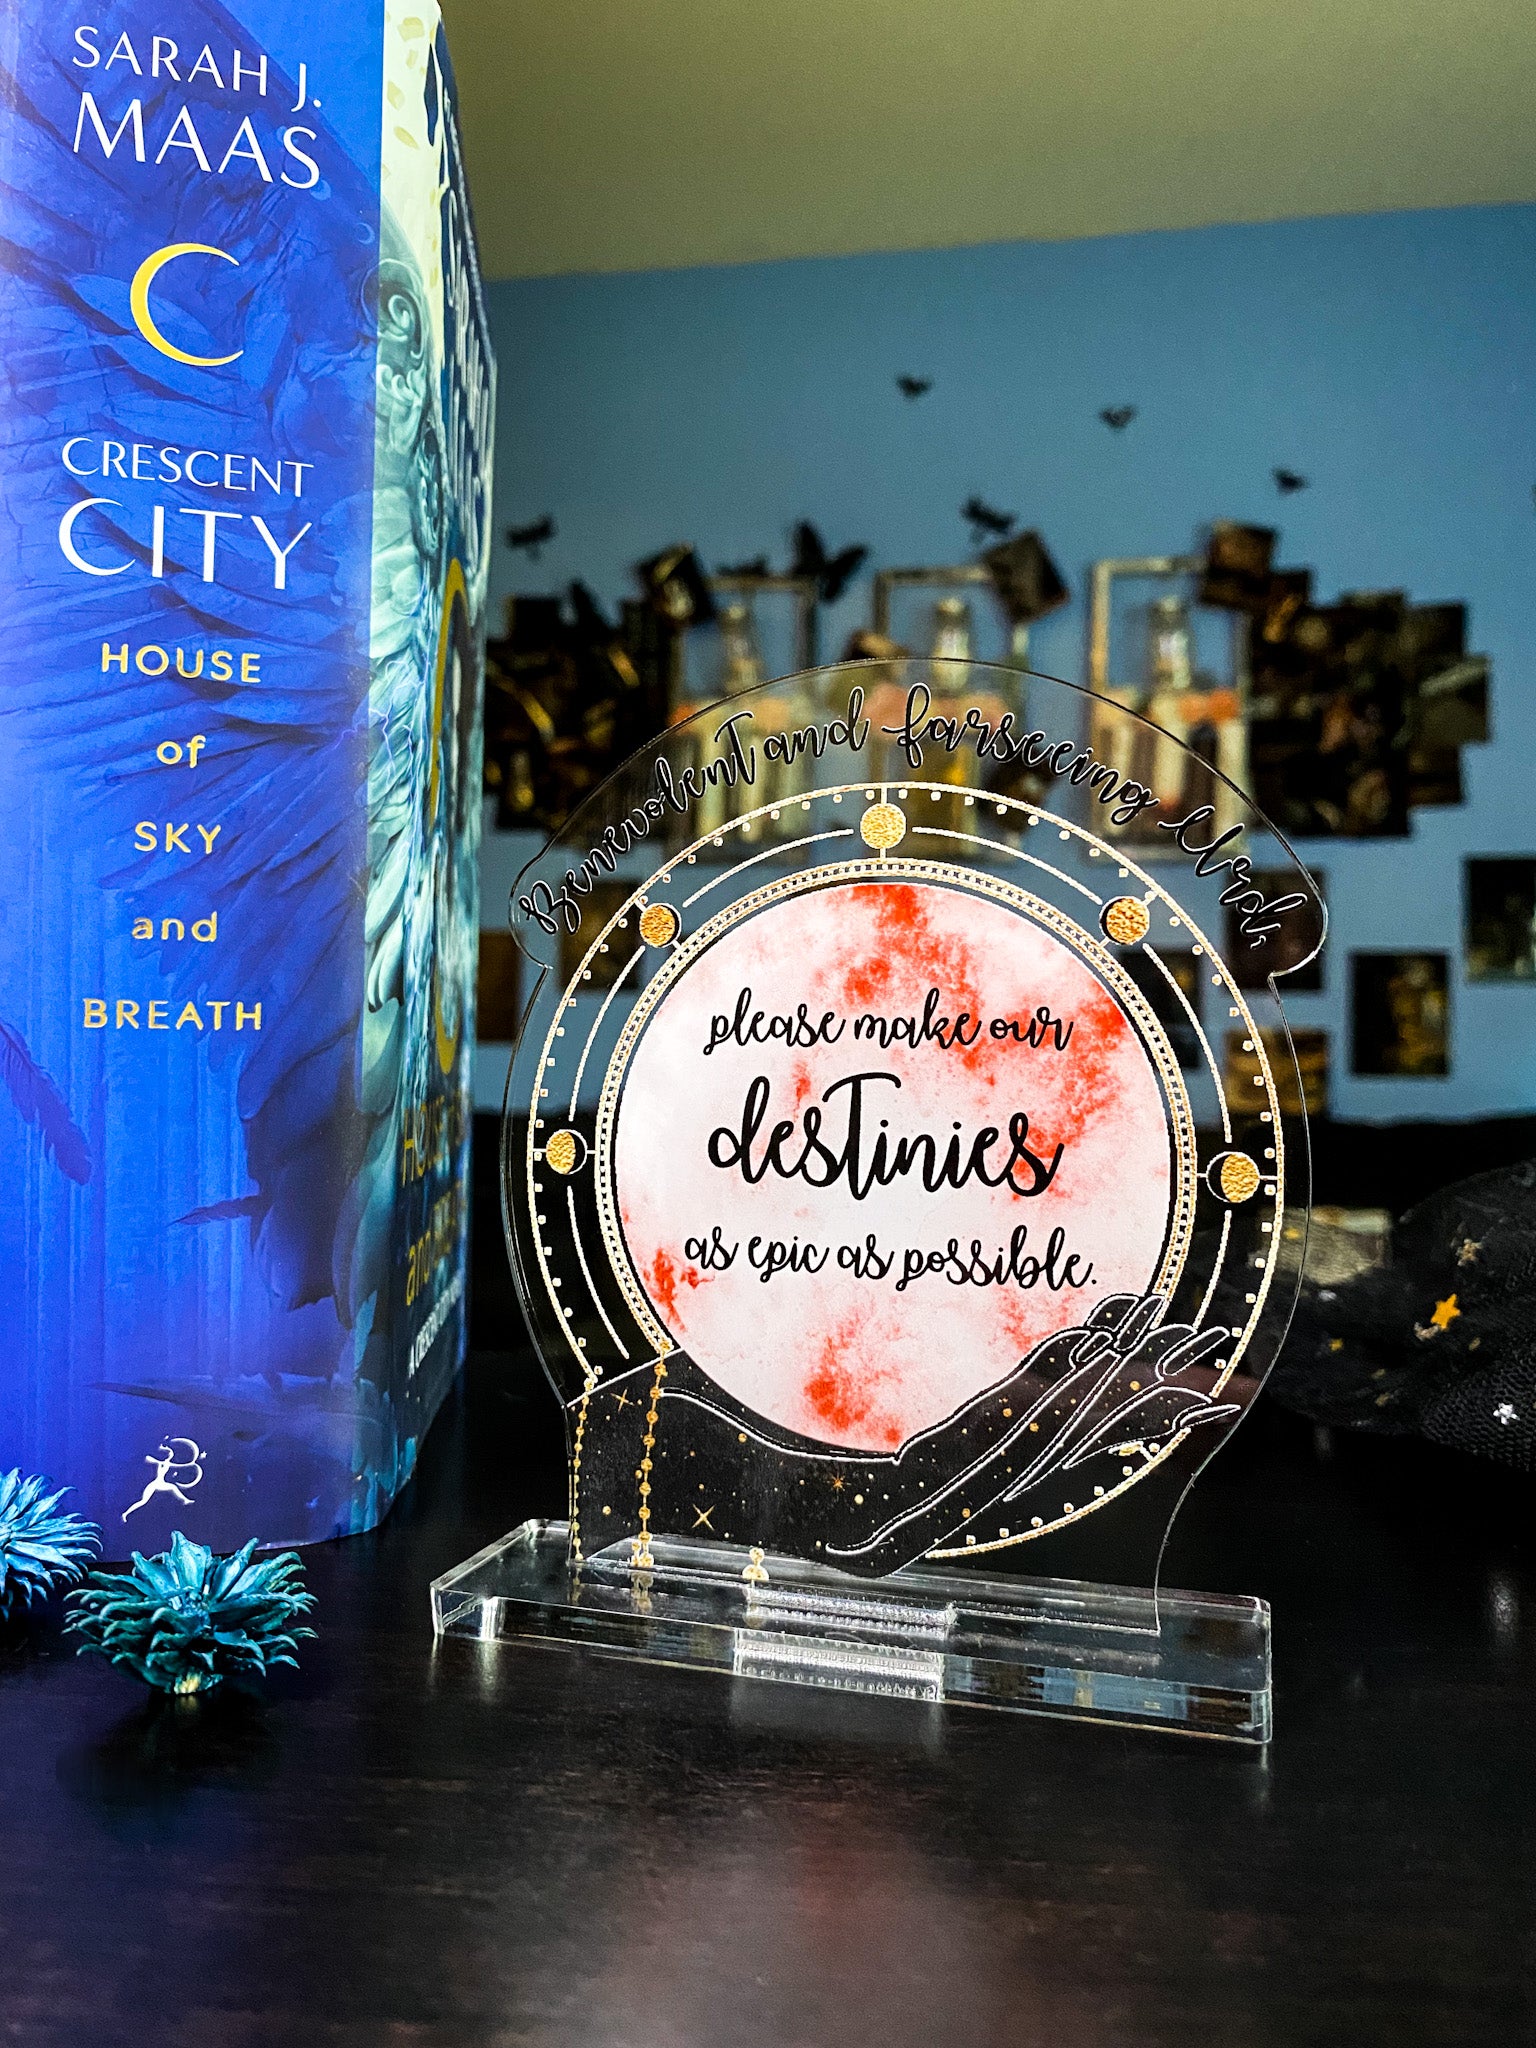 "Benevolent and farseeing Urd, please make our destinies as epic as possible" - Crescent City Series - Freestanding Bookshelf / Desktop Acrylic Accessory - Officially licensed by Sarah J. Maas - D50